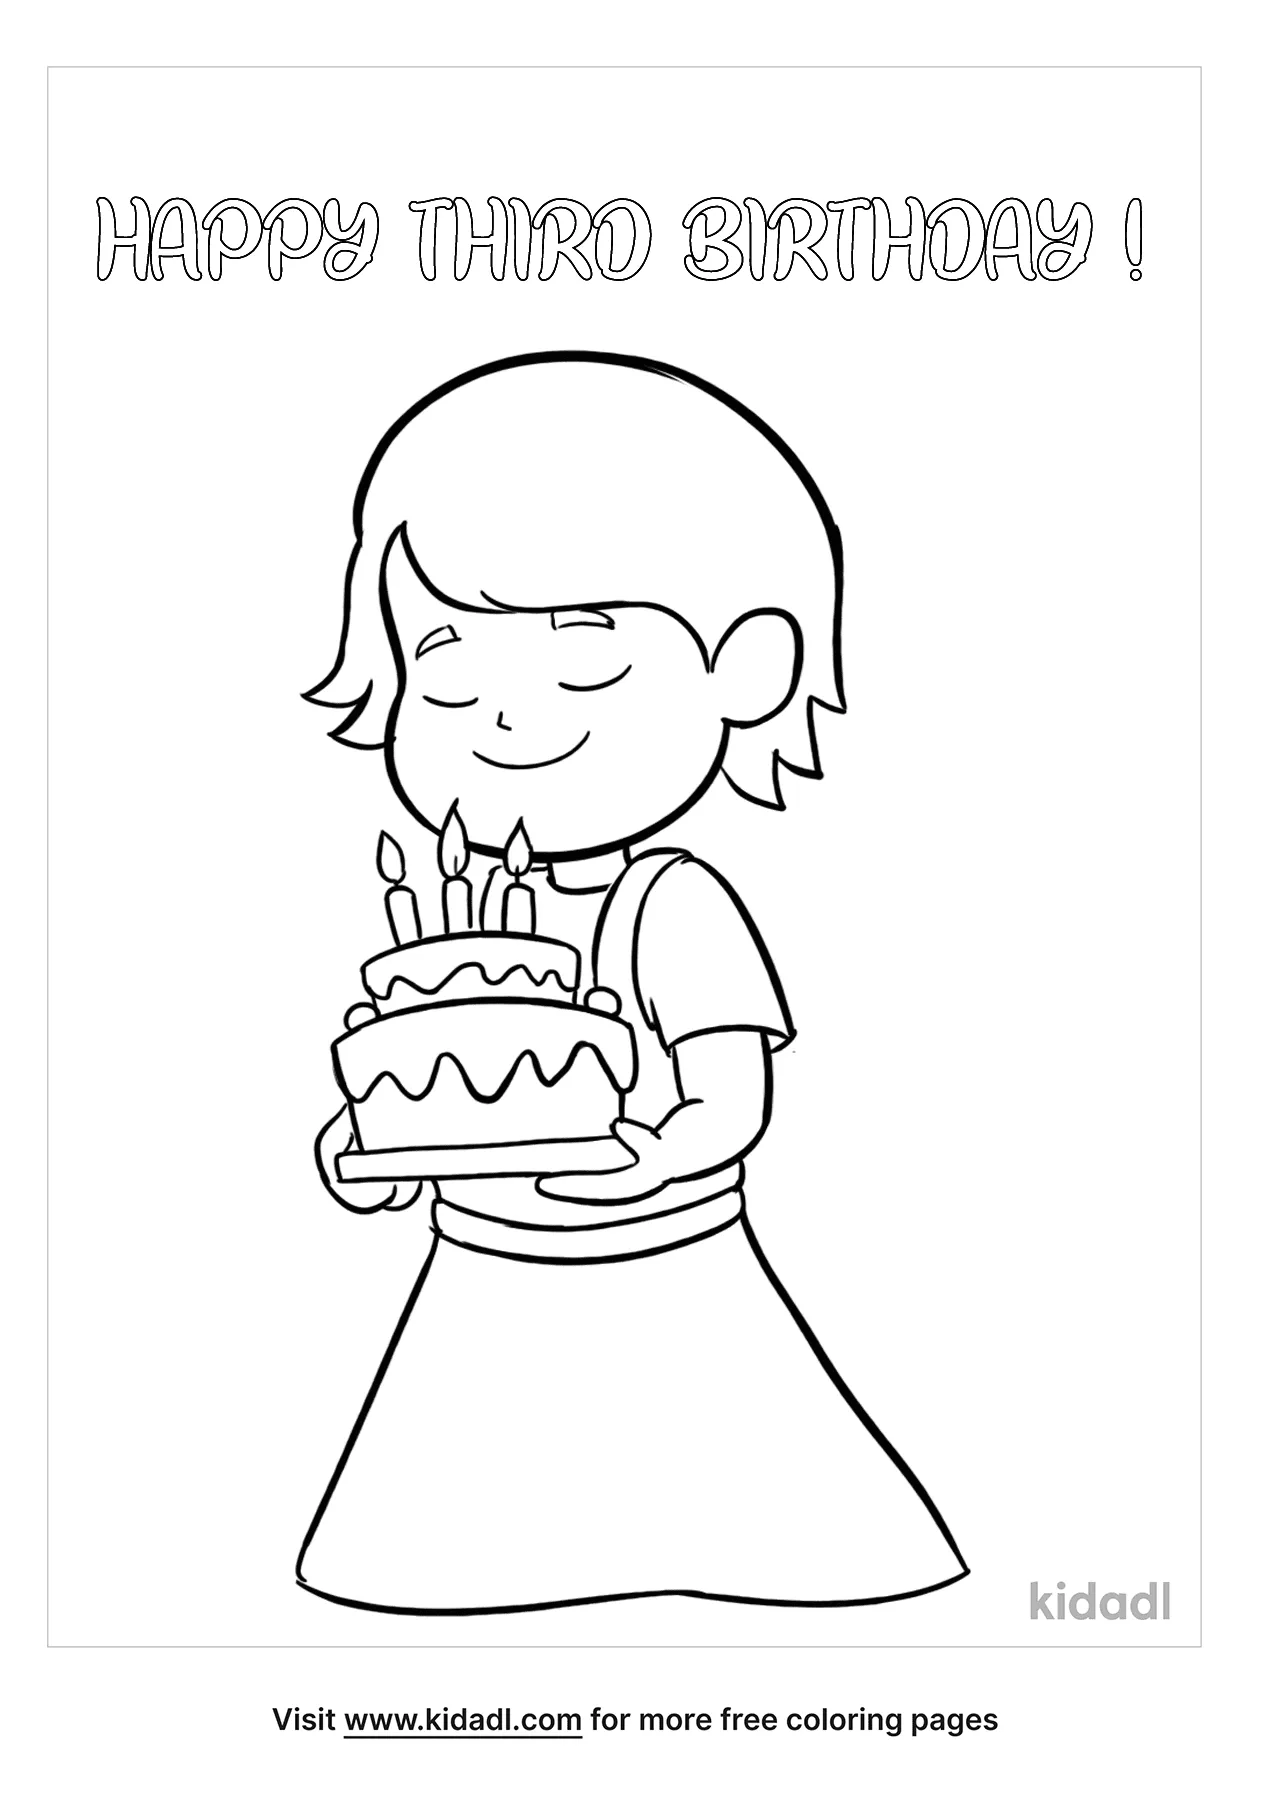 √ Quinceanera Coloring Pages / La Quinceanera Coloring